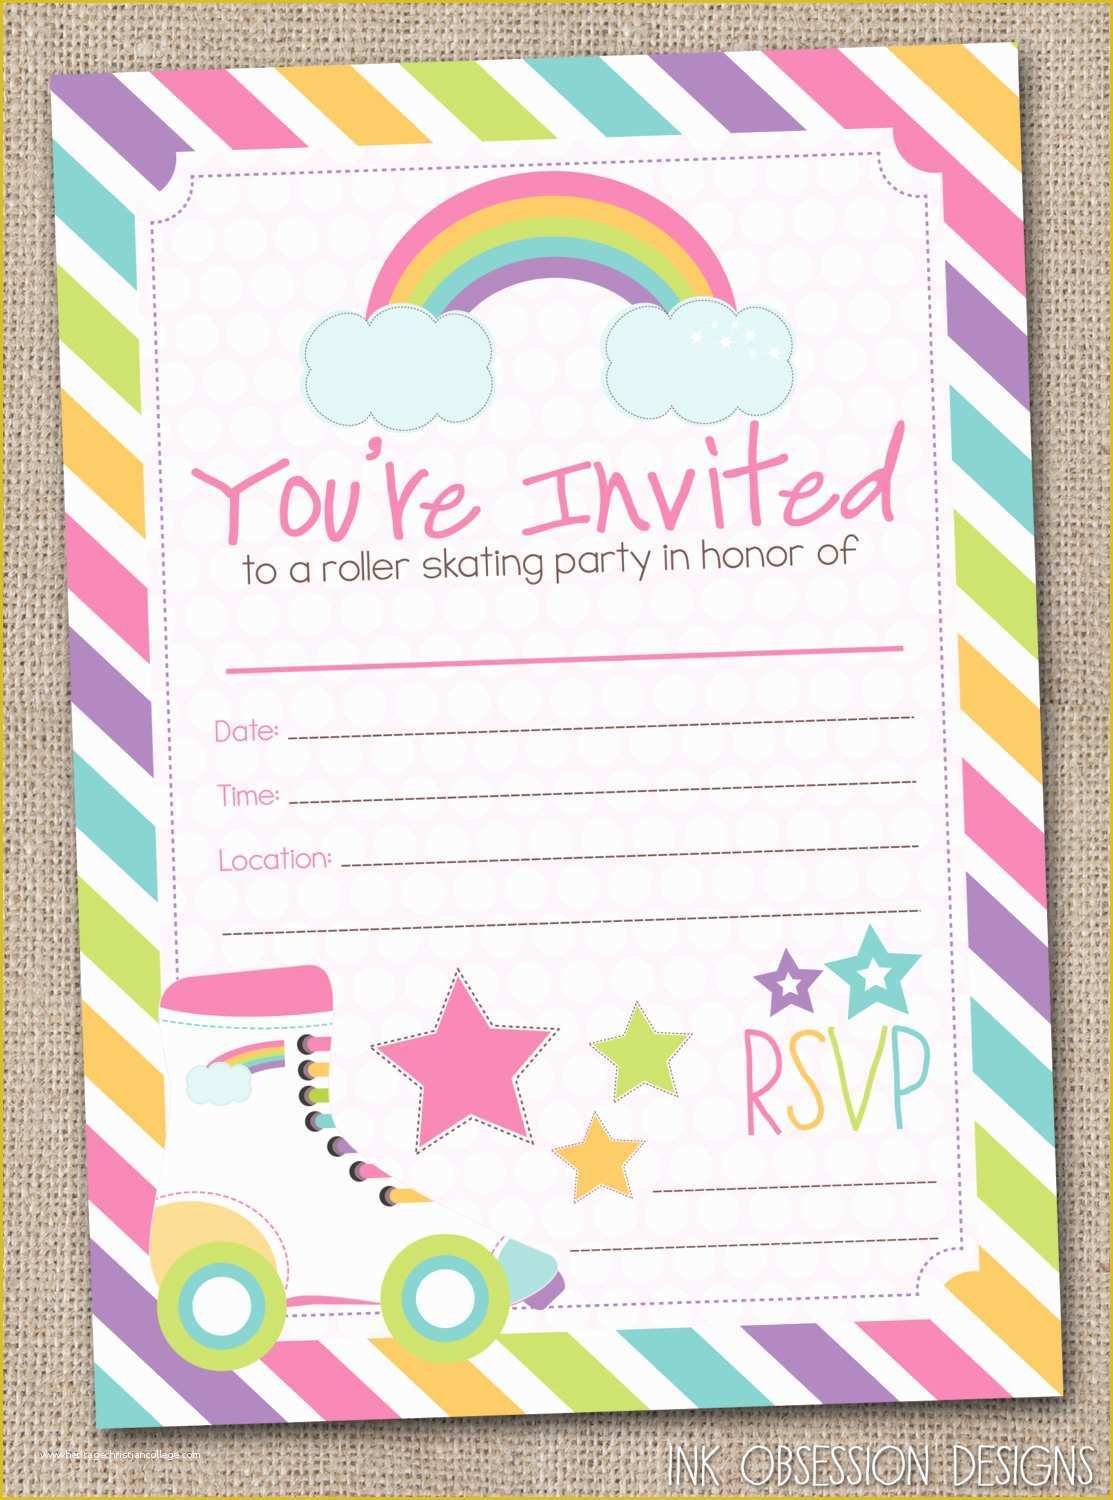 Skating Party Invitation Template Free Of Fill In Roller Skating Party Invitations by